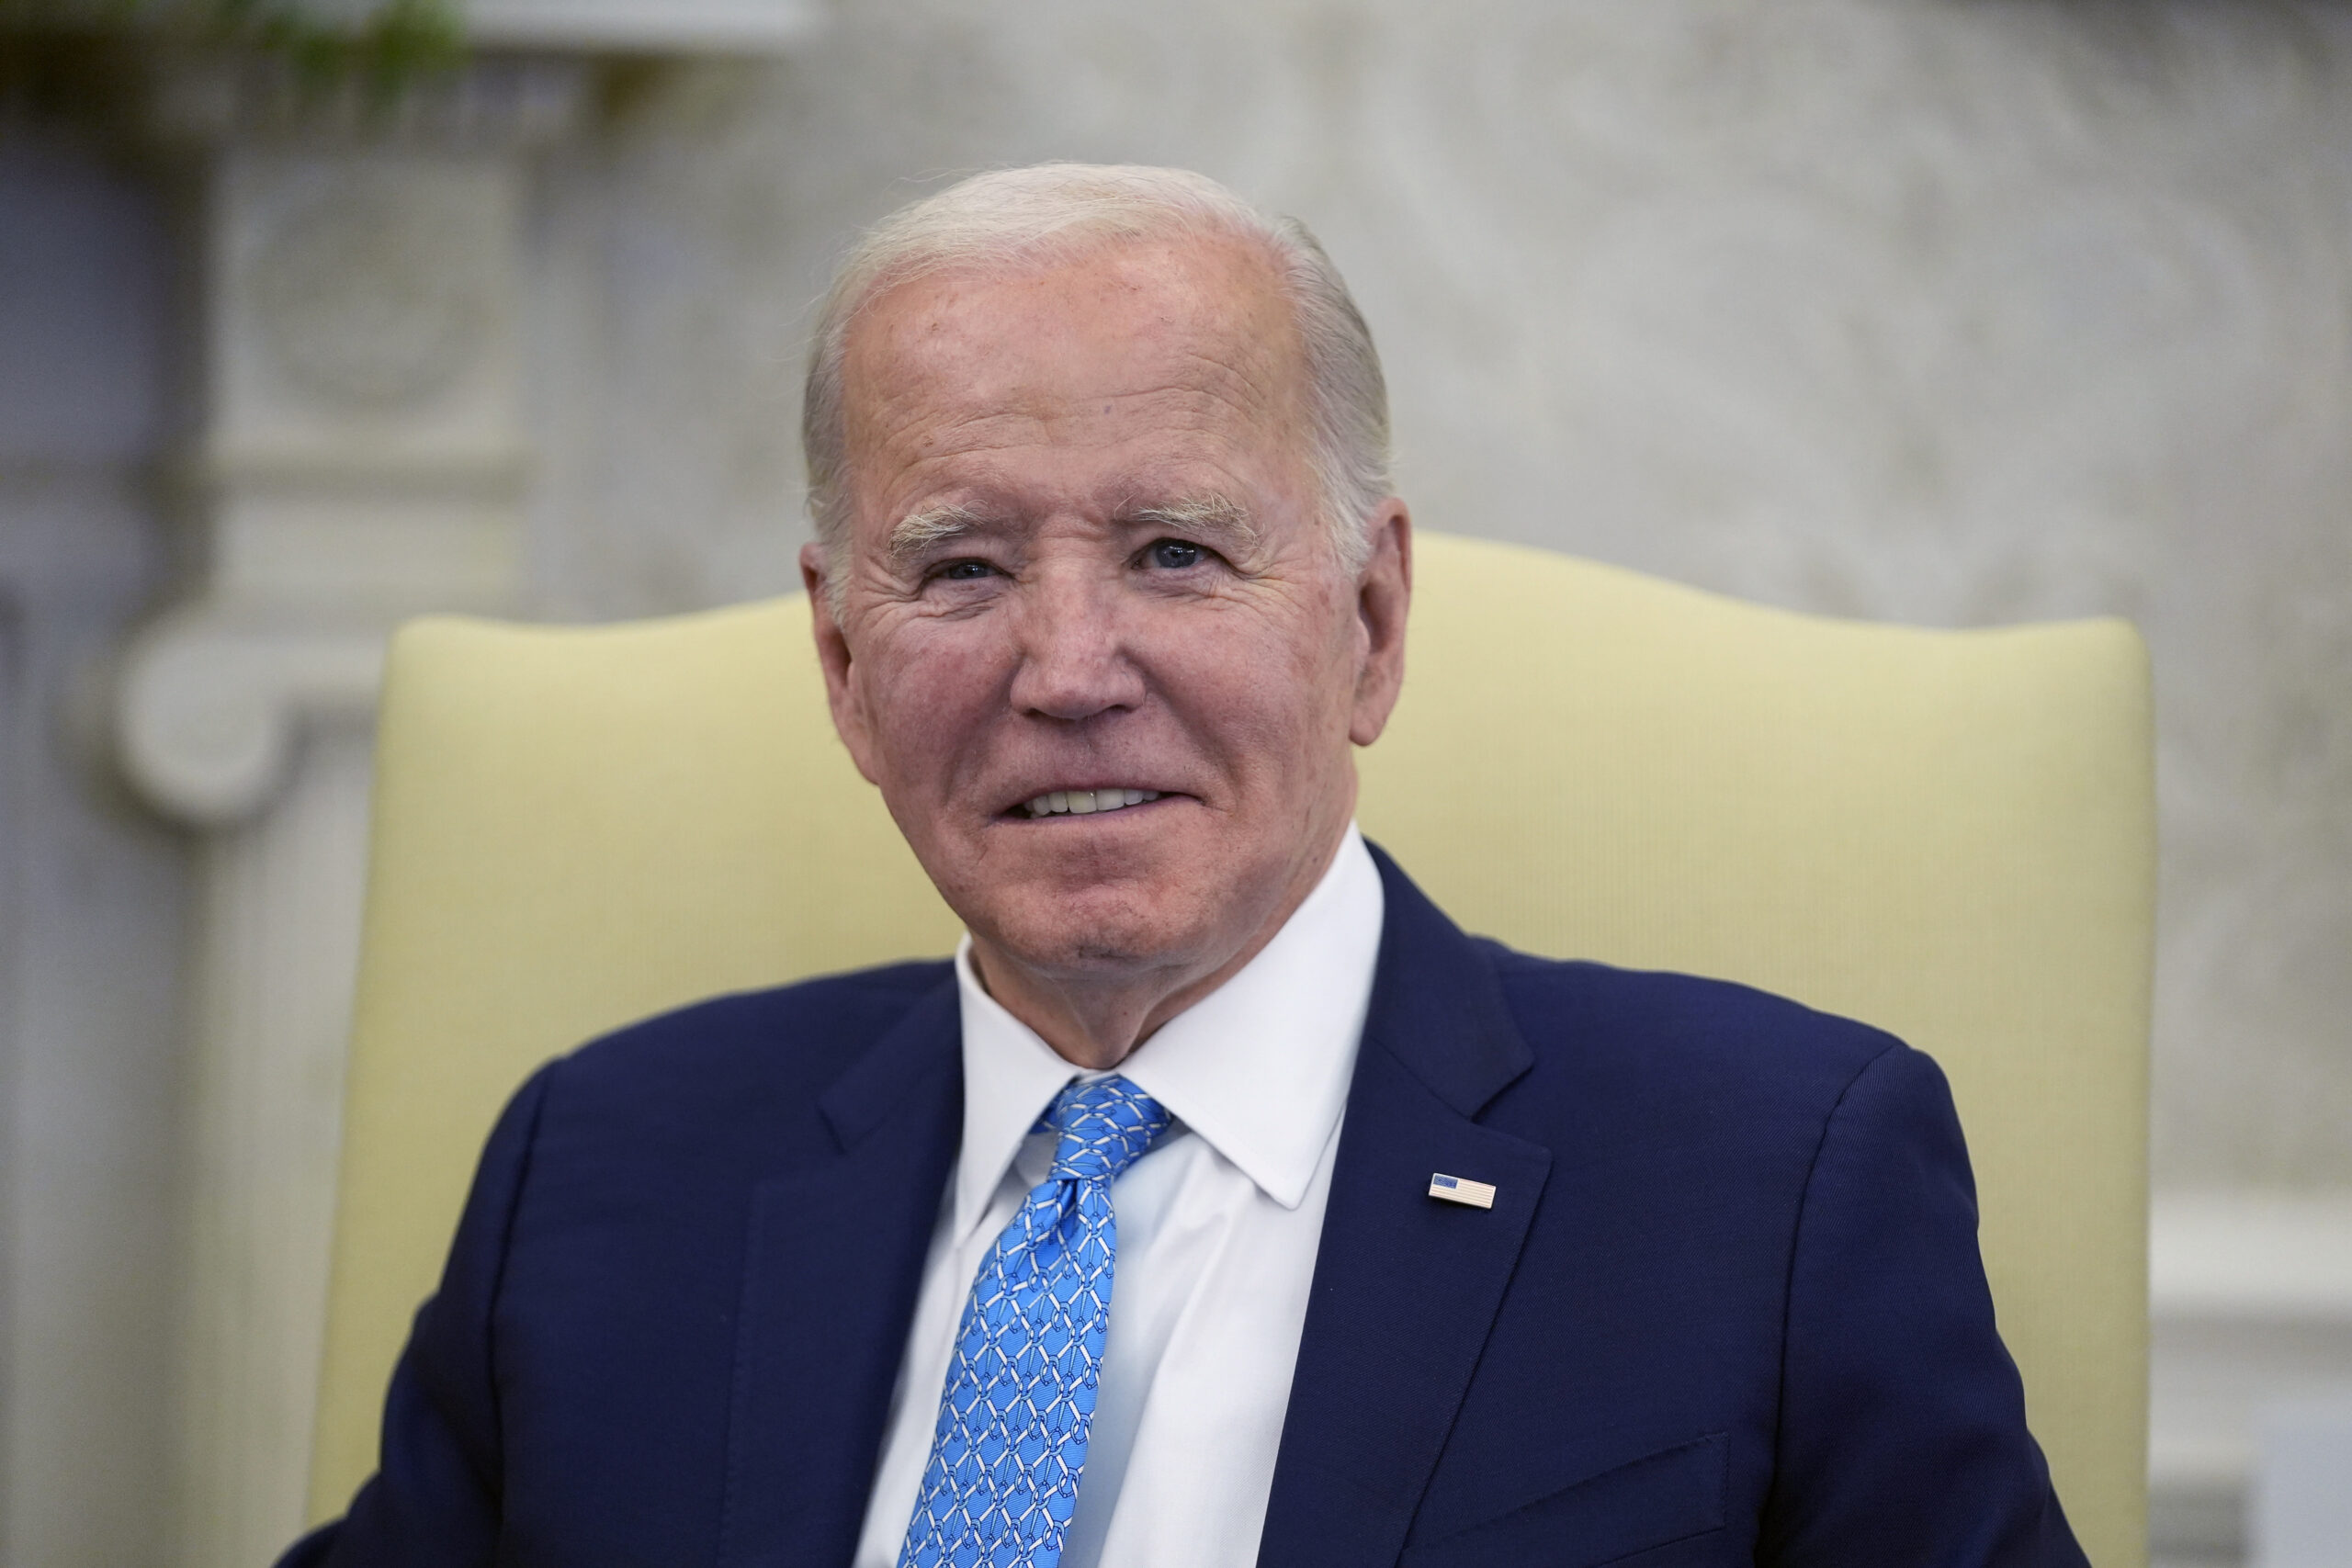 ‘This is Horrible News’: Democratic Governor Slams Biden On Economics, Offers Own Plan to Crush Inflation